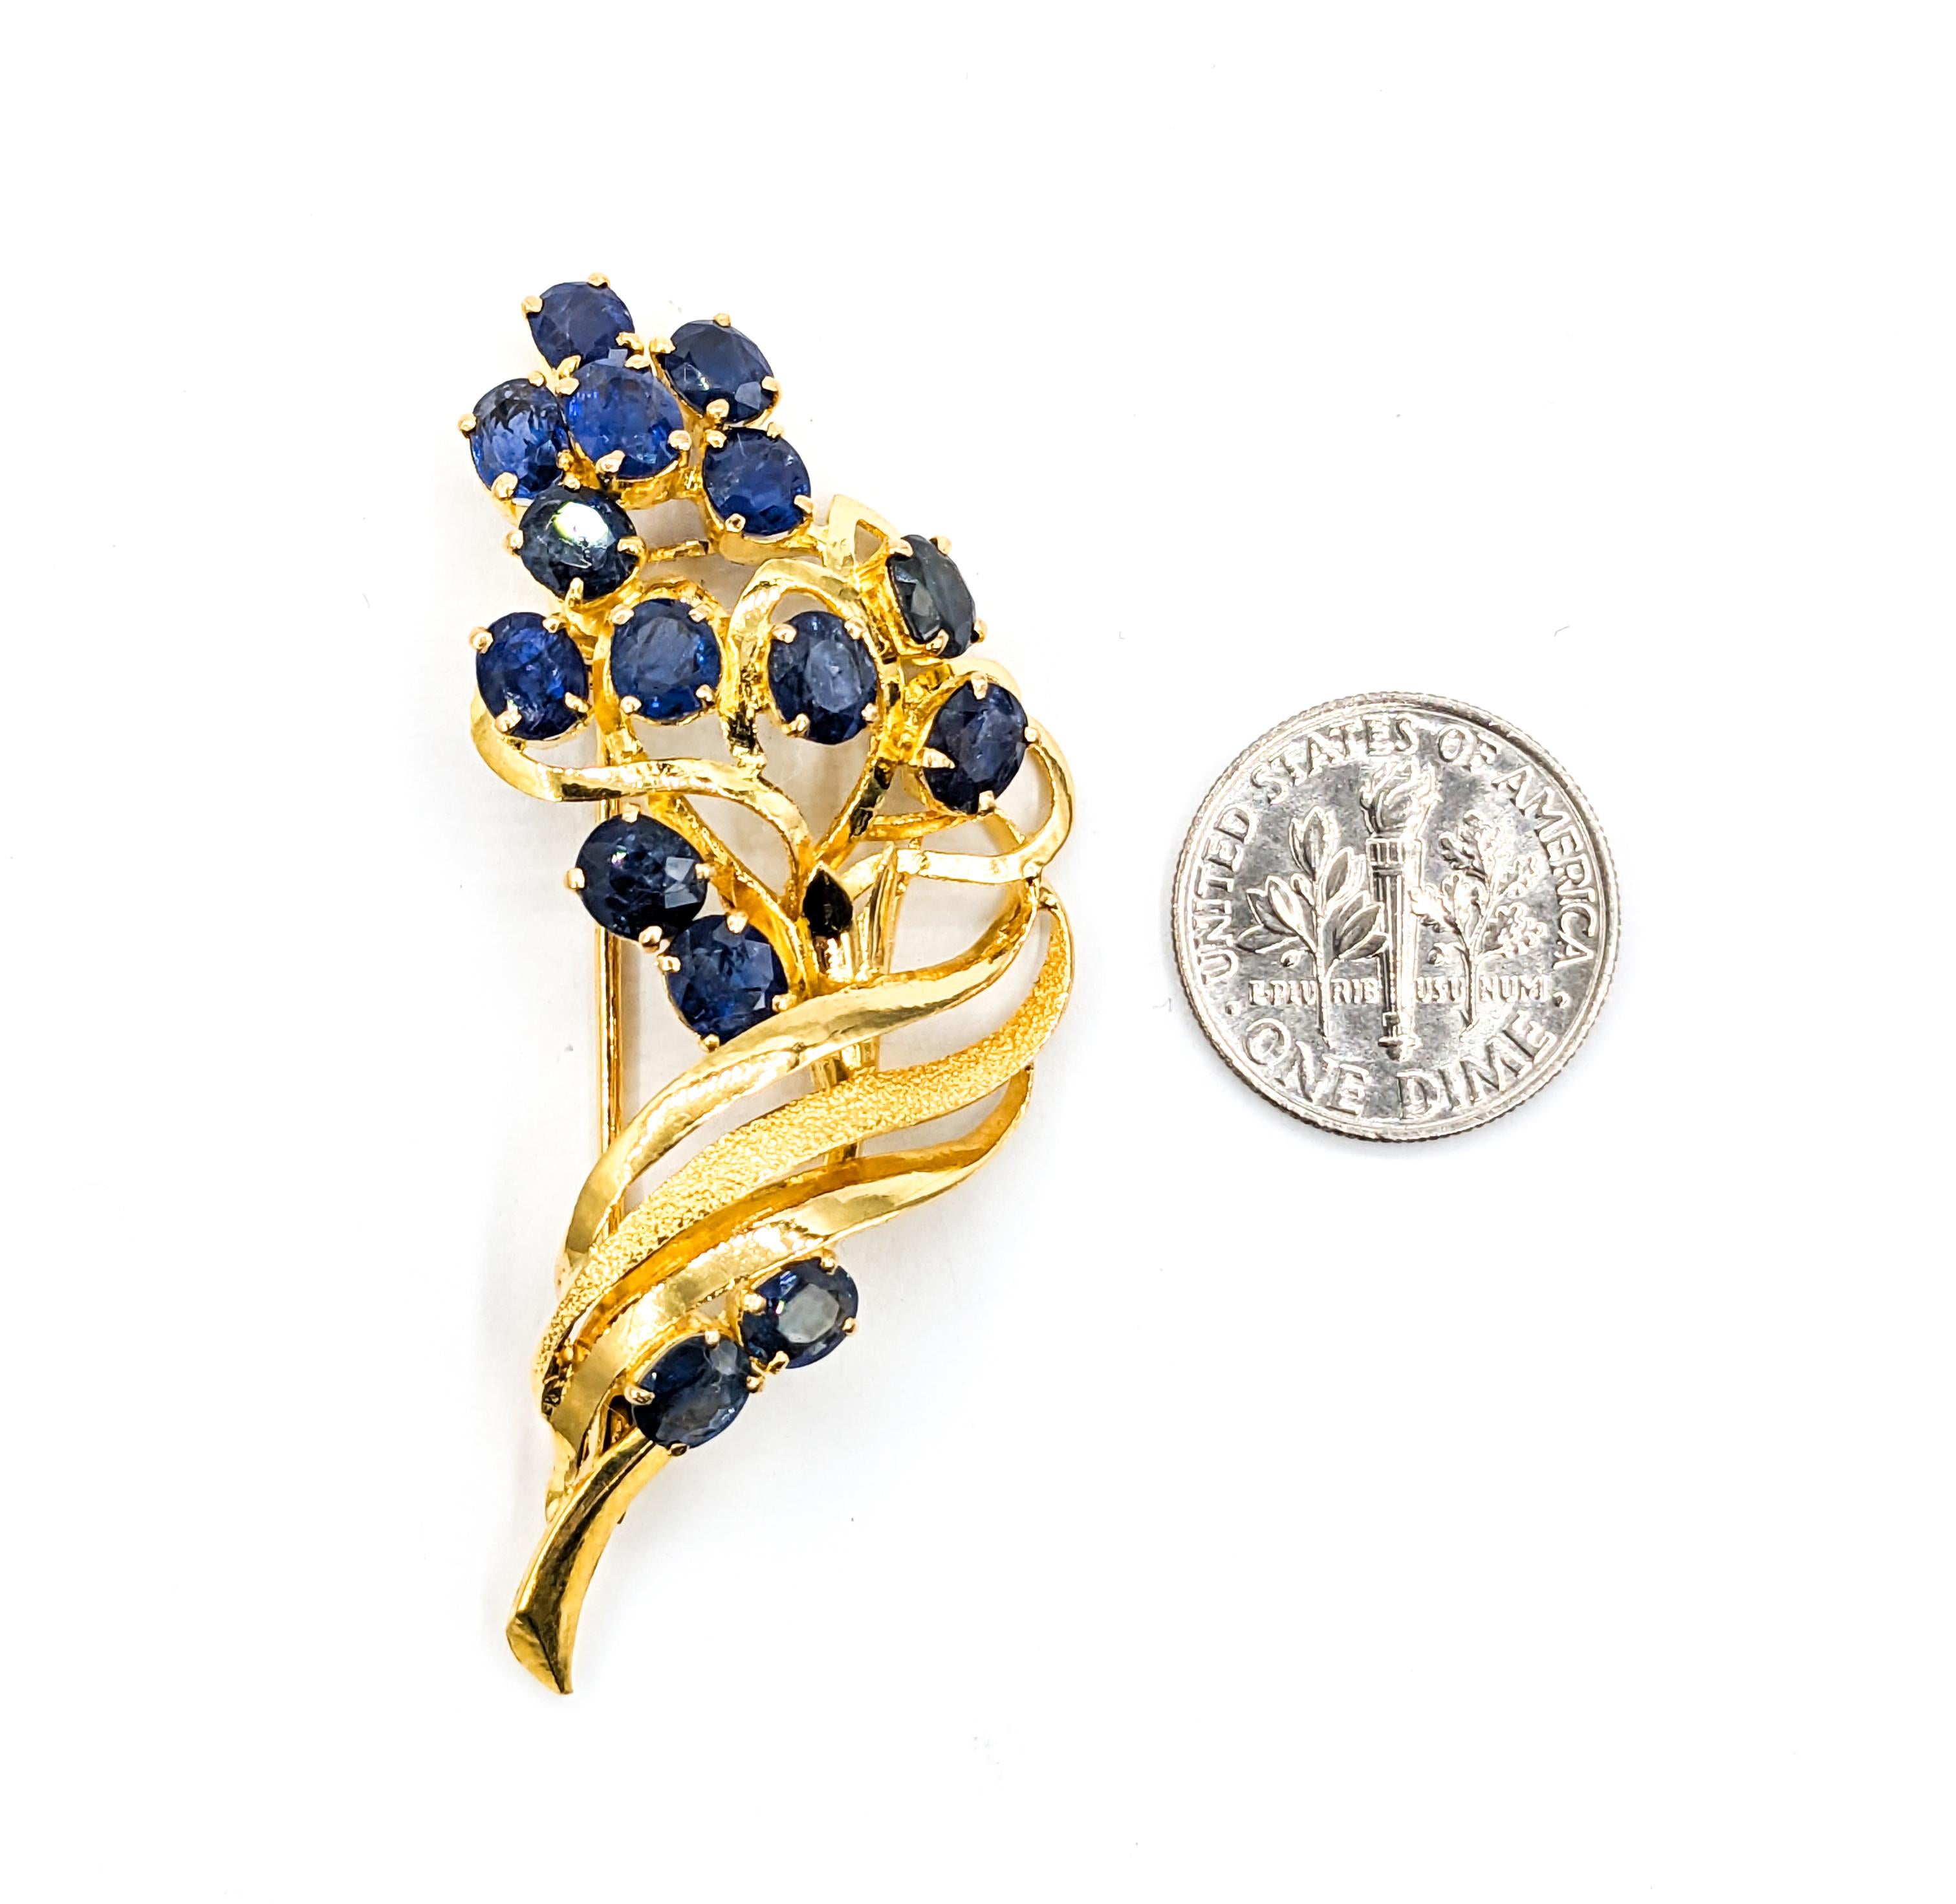 Freeform Floral Sapphire Brooch in Gold In Excellent Condition For Sale In Bloomington, MN